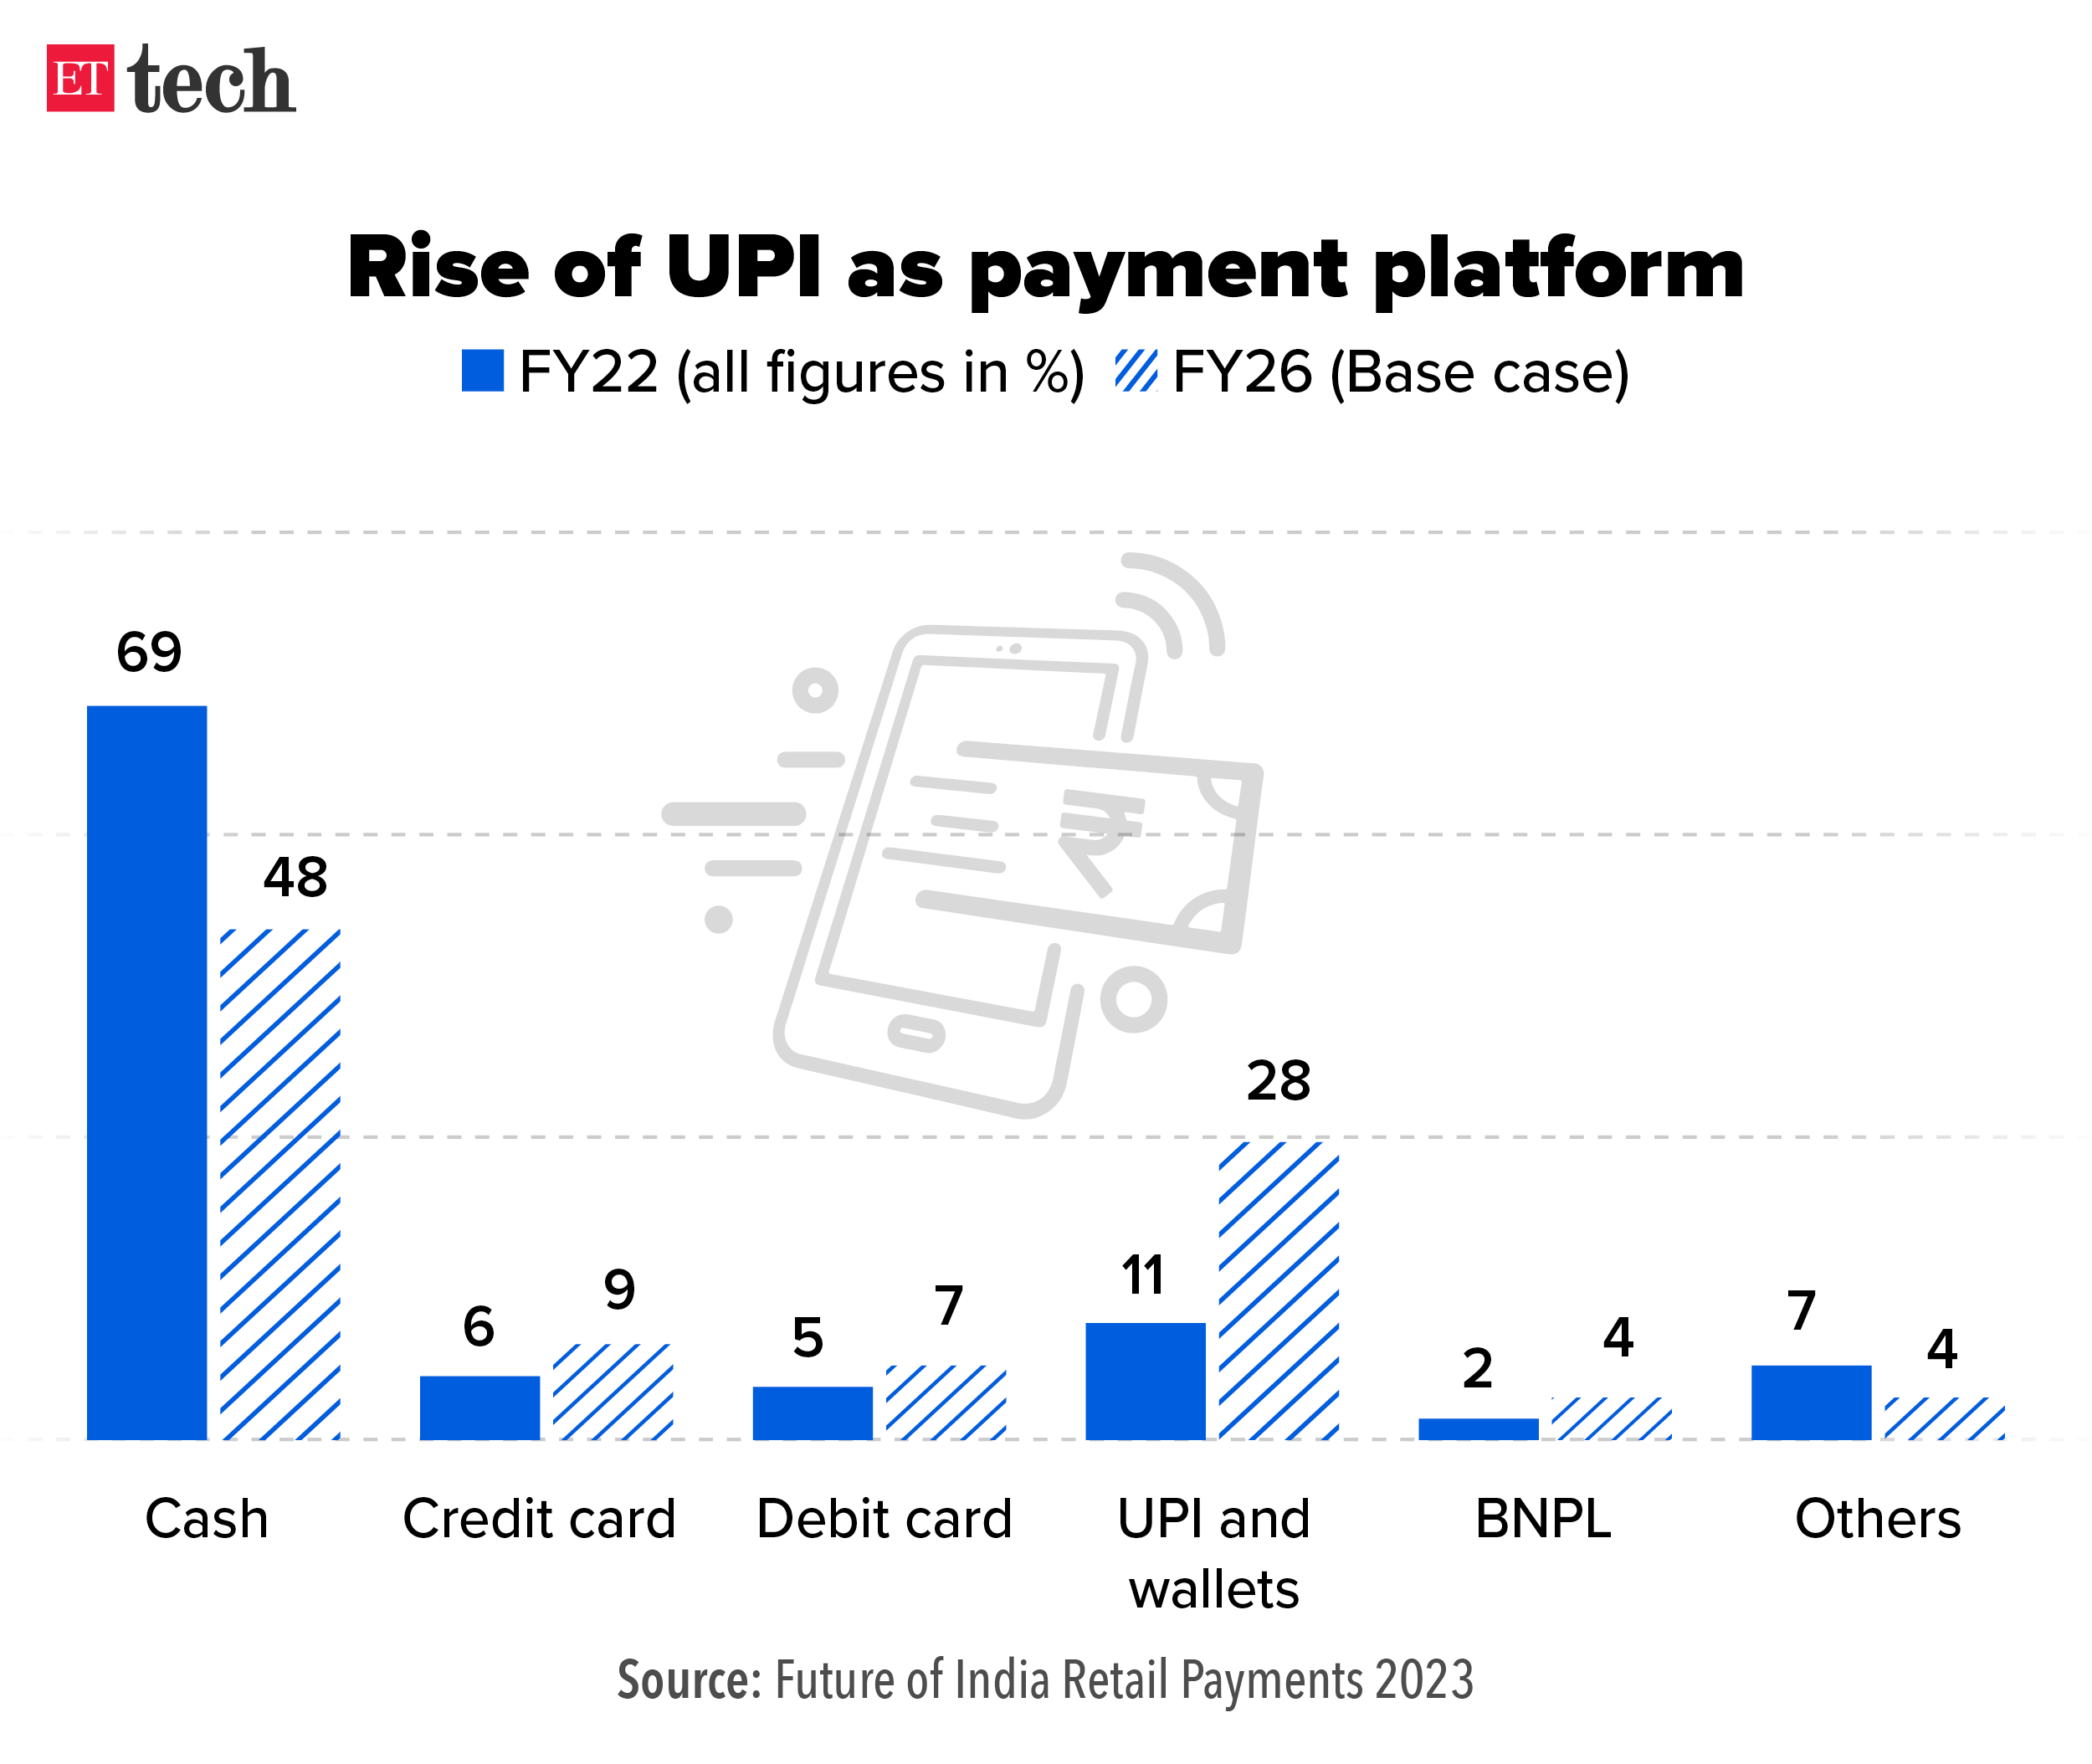 How the shares of different payment modes will change_Graphic_ETTECH